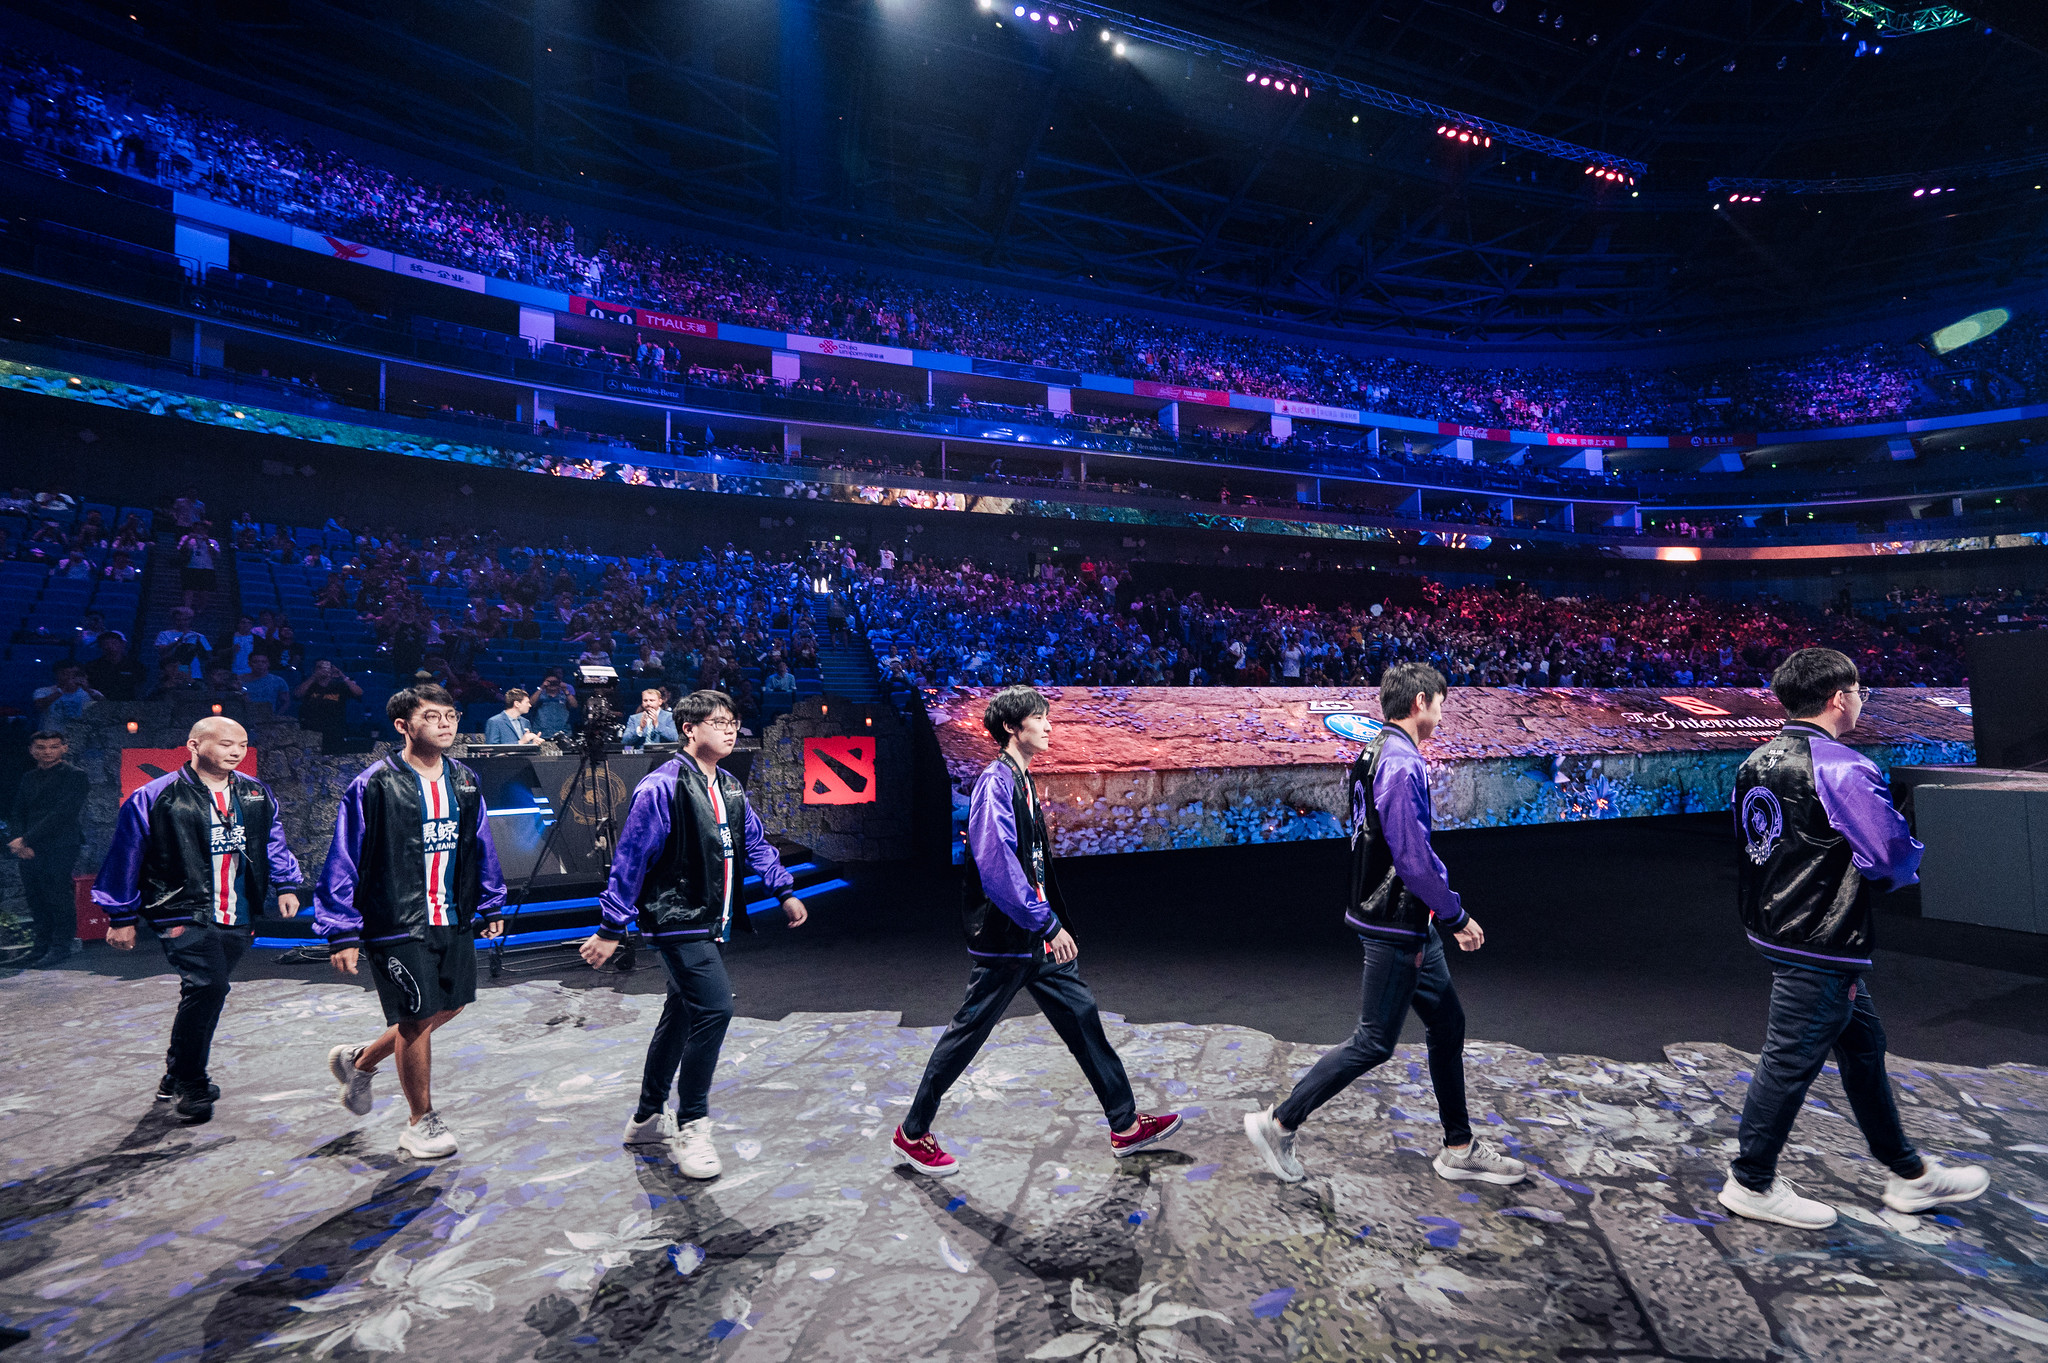 PSG.LGD take a calculated win over Vici Gaming at The International